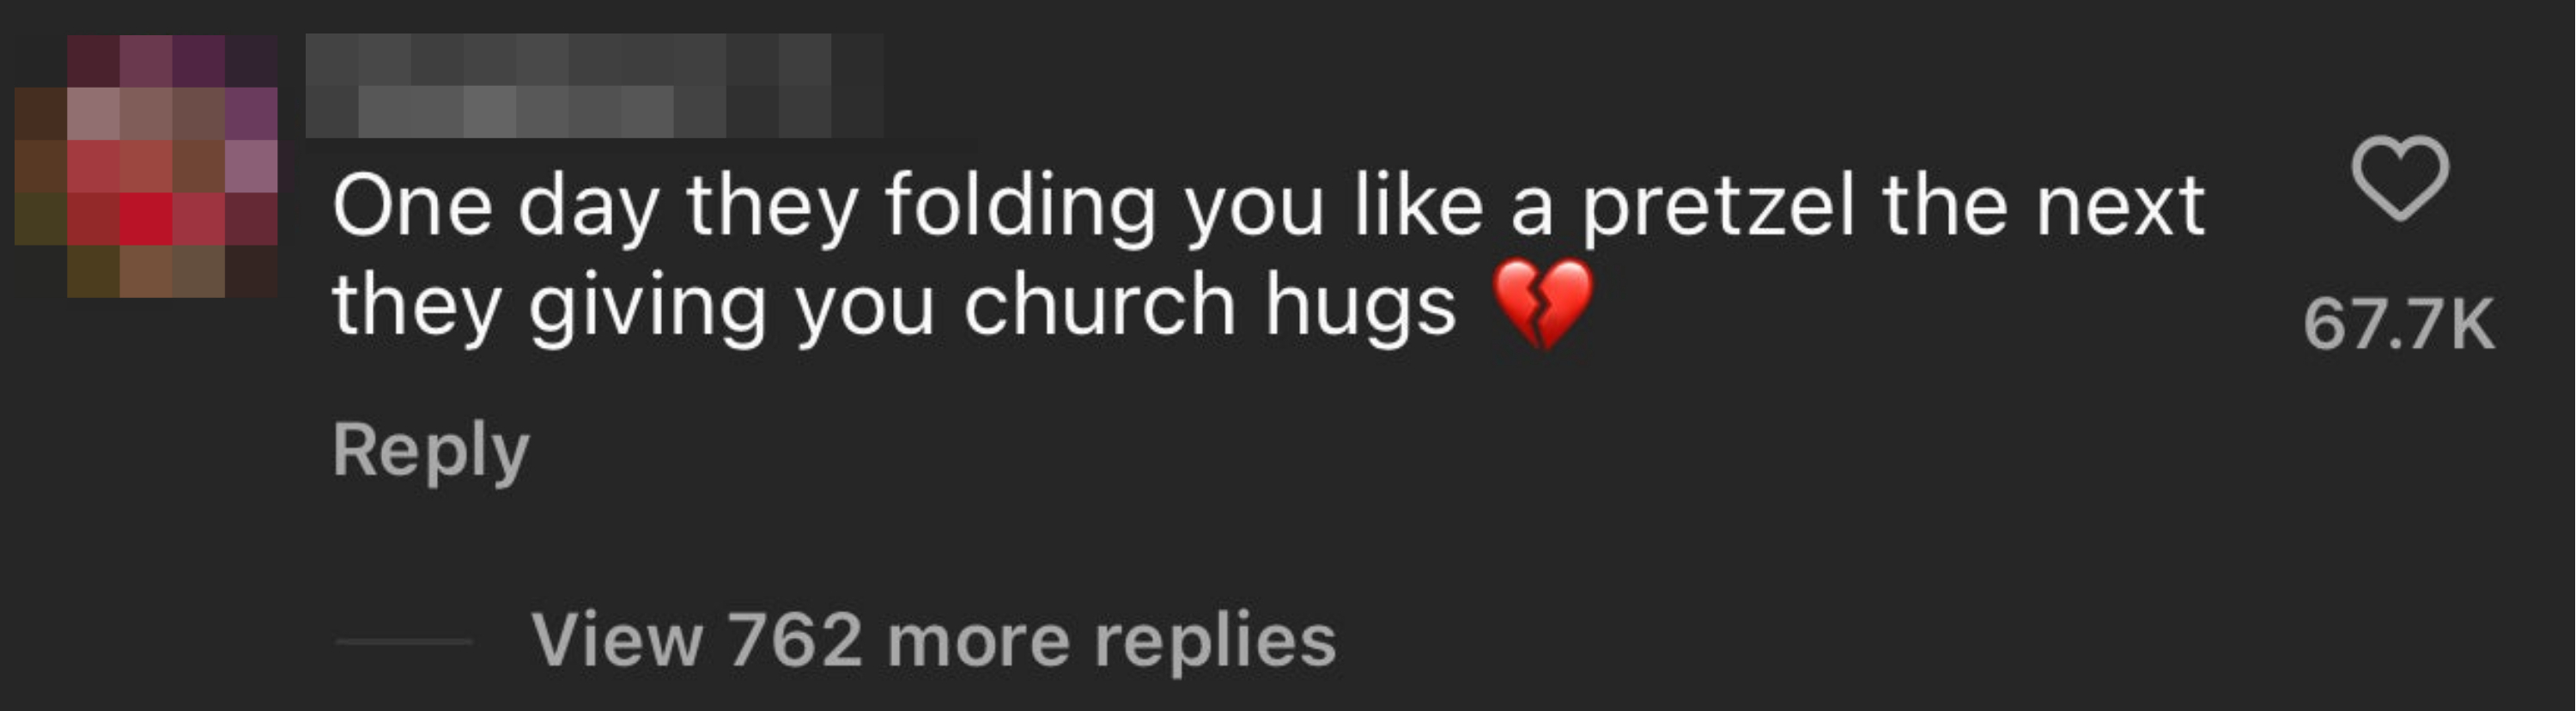 Comment on a post: &quot;One day they folding you like a pretzel the next they giving you church hugs, {broken heart emoji}&quot;